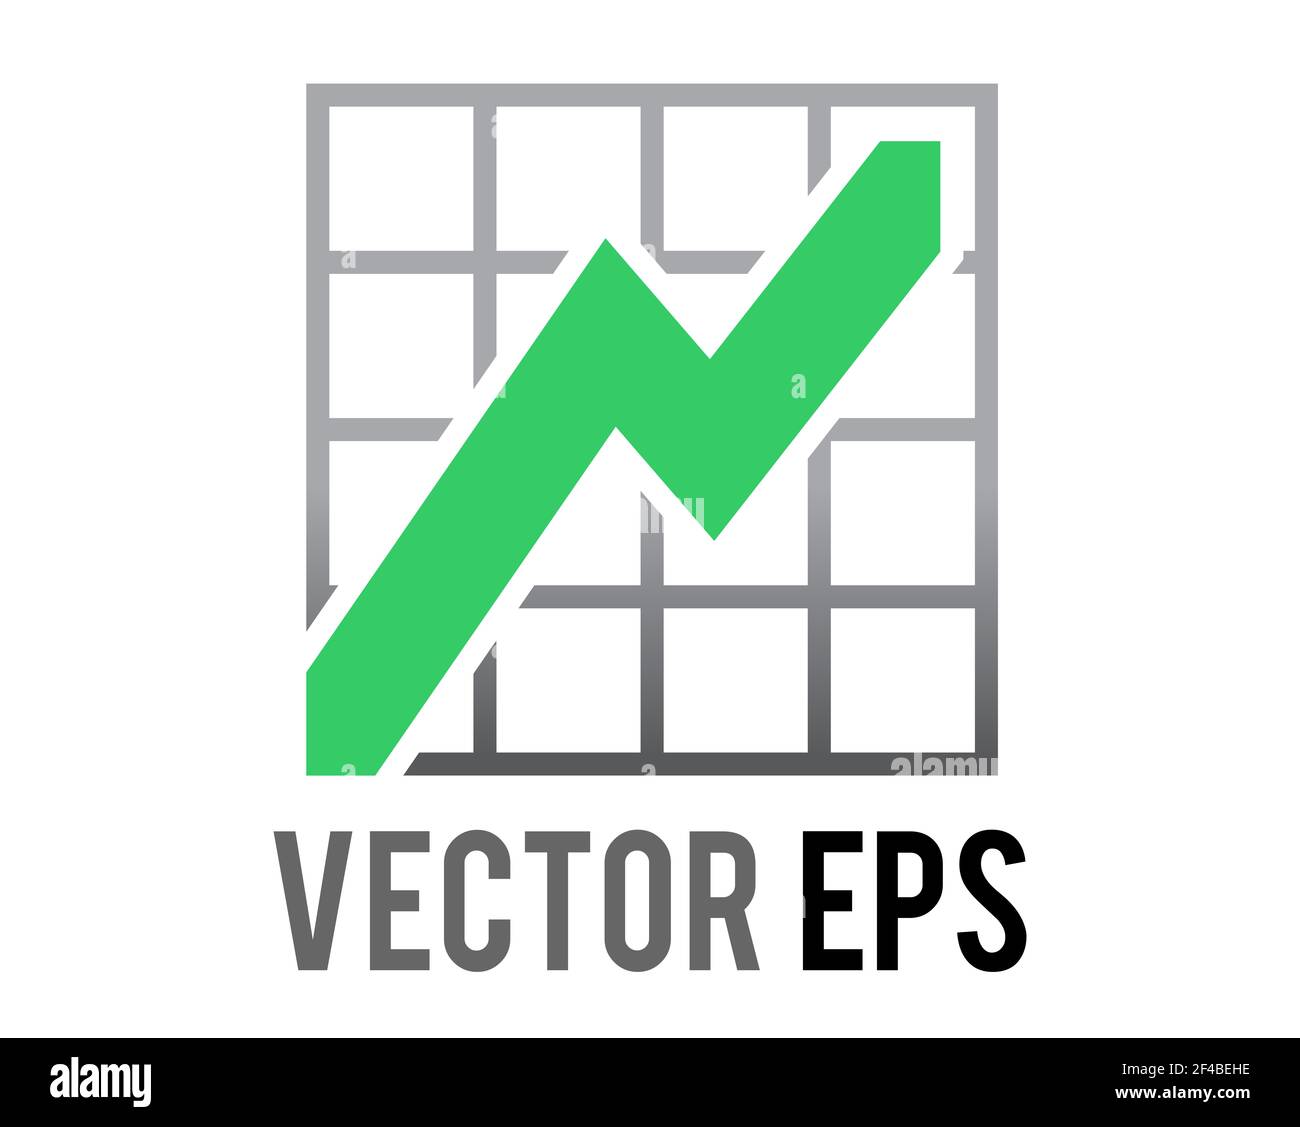 The vector green business presentation summary finance report bar chart increasing icon showing three different colored vertical rectangles Stock Photo